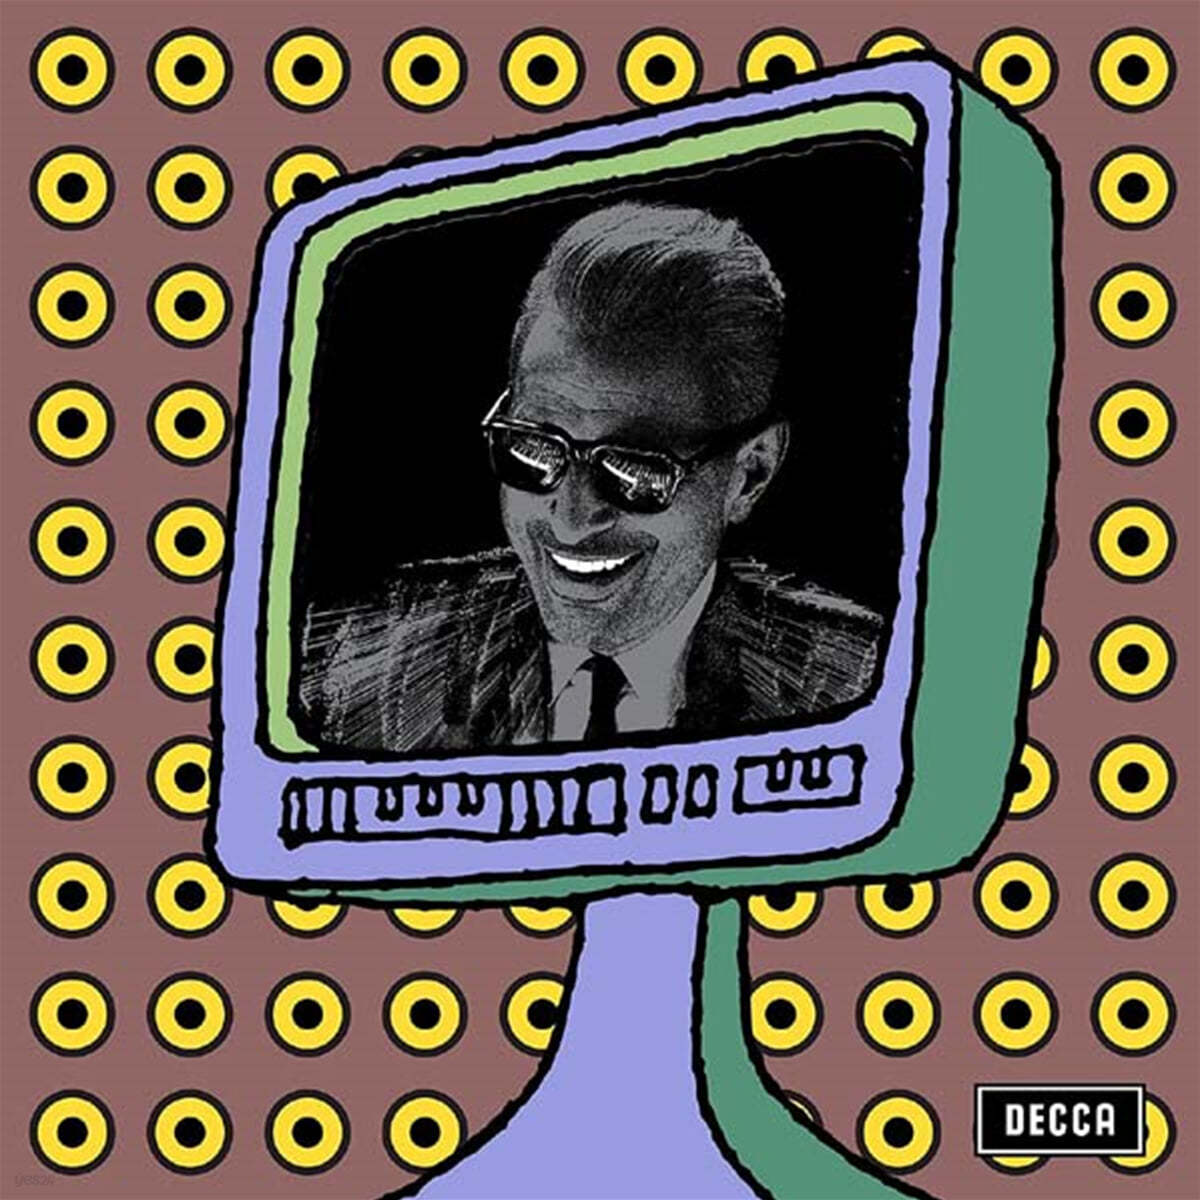 Jeff Goldblum &amp; The Mildred Snitzer Orchestra (제프 골드브럼 &amp; 밀드레드 스니처 오케스트라) - Plays Well With Others [LP]